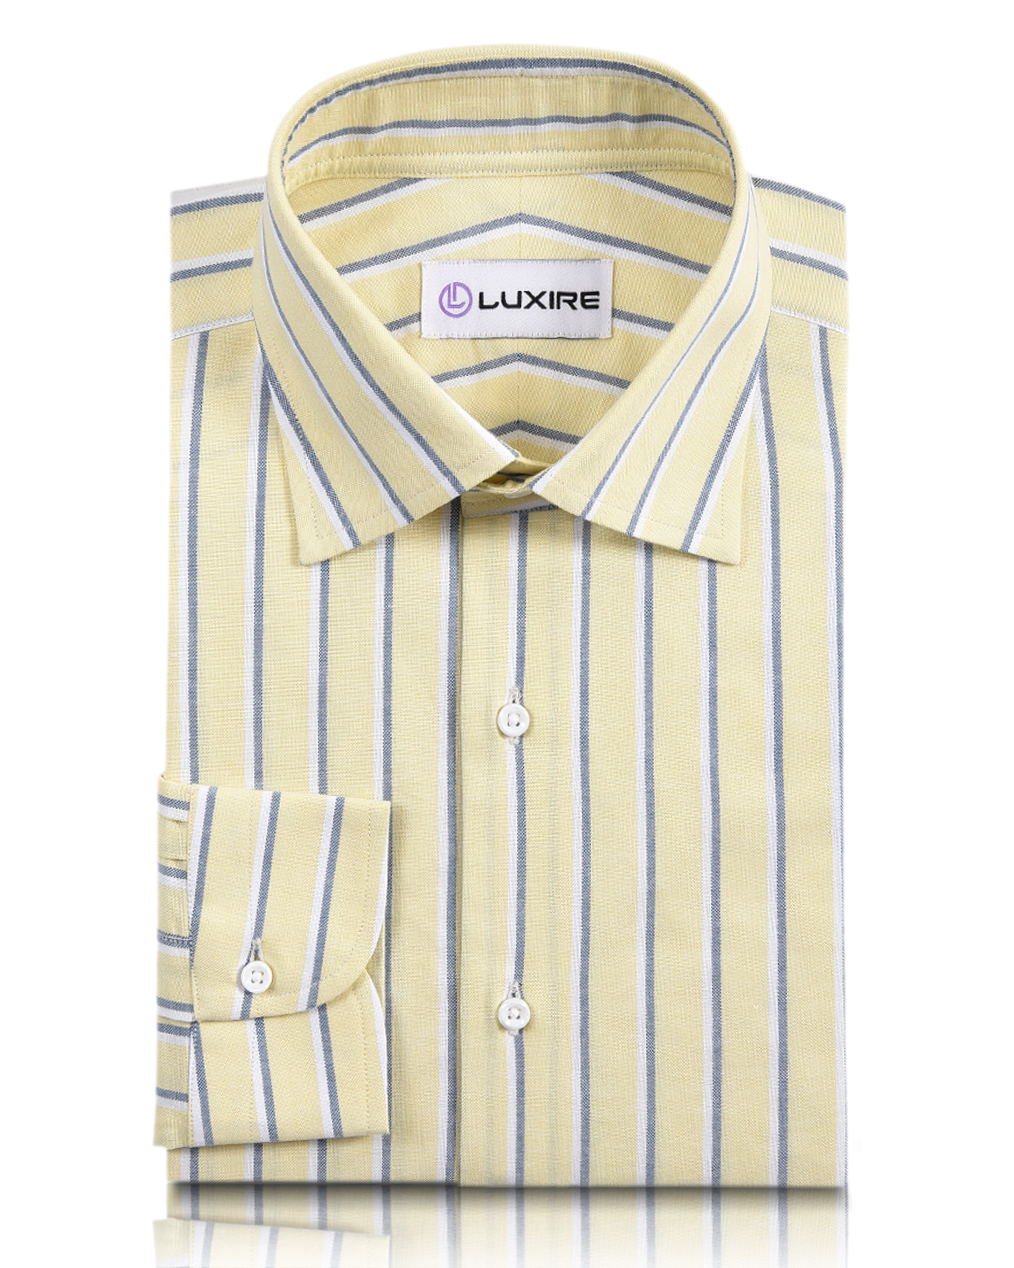 Front of the custom oxford shirt for men by Luxire in pale yellow with indigo and white stripes